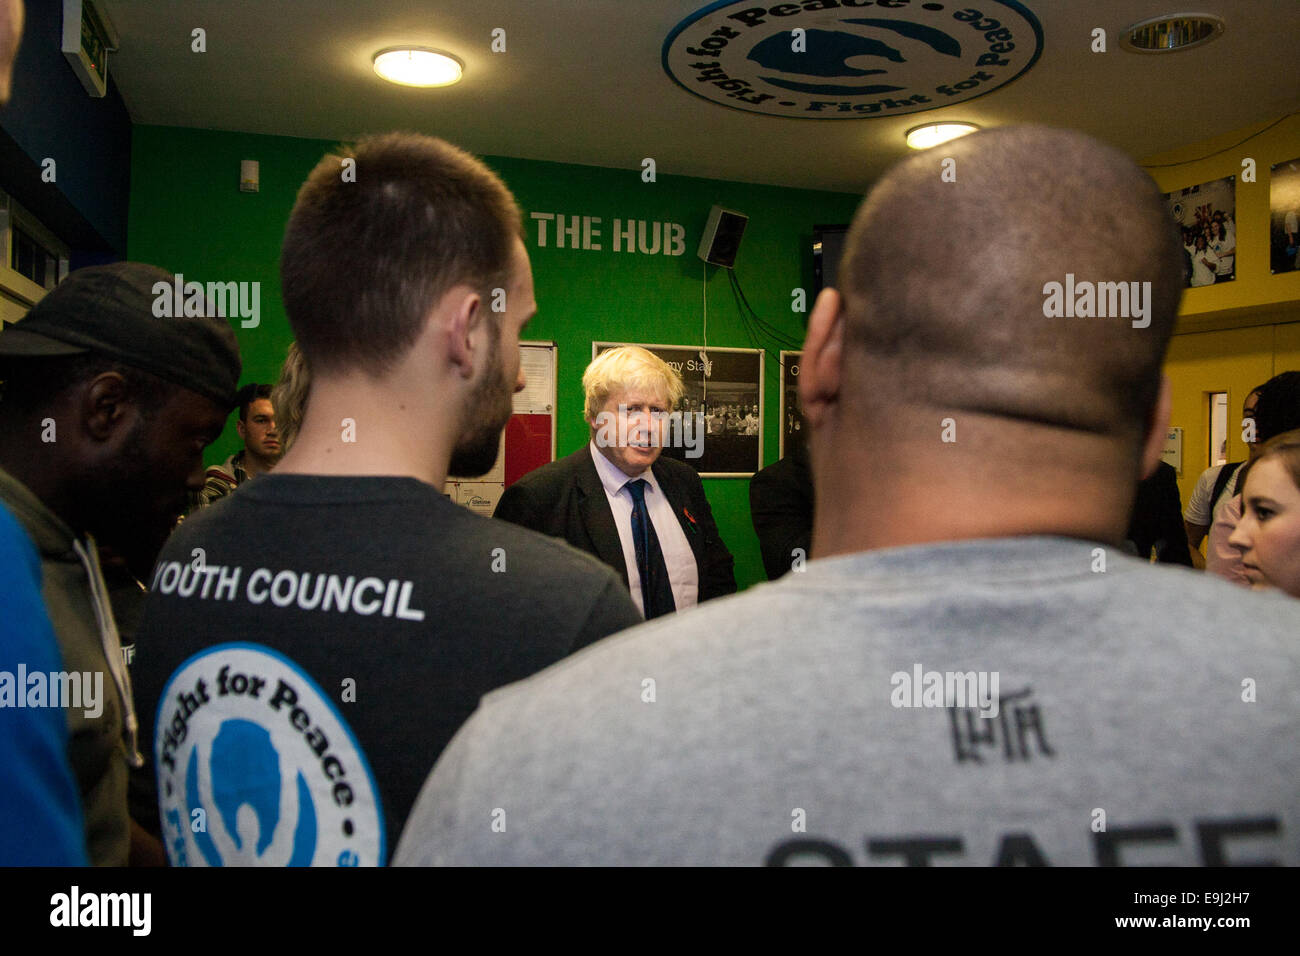 London, UK. 28th October, 2014.  The Mayor of London, Boris Johnson, visits a training session at Fight for Peace Academy in Newham. Fight for Peace uses boxing and martial arts combined with education and personal development to realise the potential of young people in the borough at risk of crime and violence. First established in Rio in 2000 by Luke Dowdney MBE, it was replicated in Newham in 2007. It is now expanding globally and began rolling out across the UK. Pictured: Mayor Boris Johnson speaks with members of Fight for Peace before stepping into the ring. Credit:  Paul Davey/Alamy Liv Stock Photo